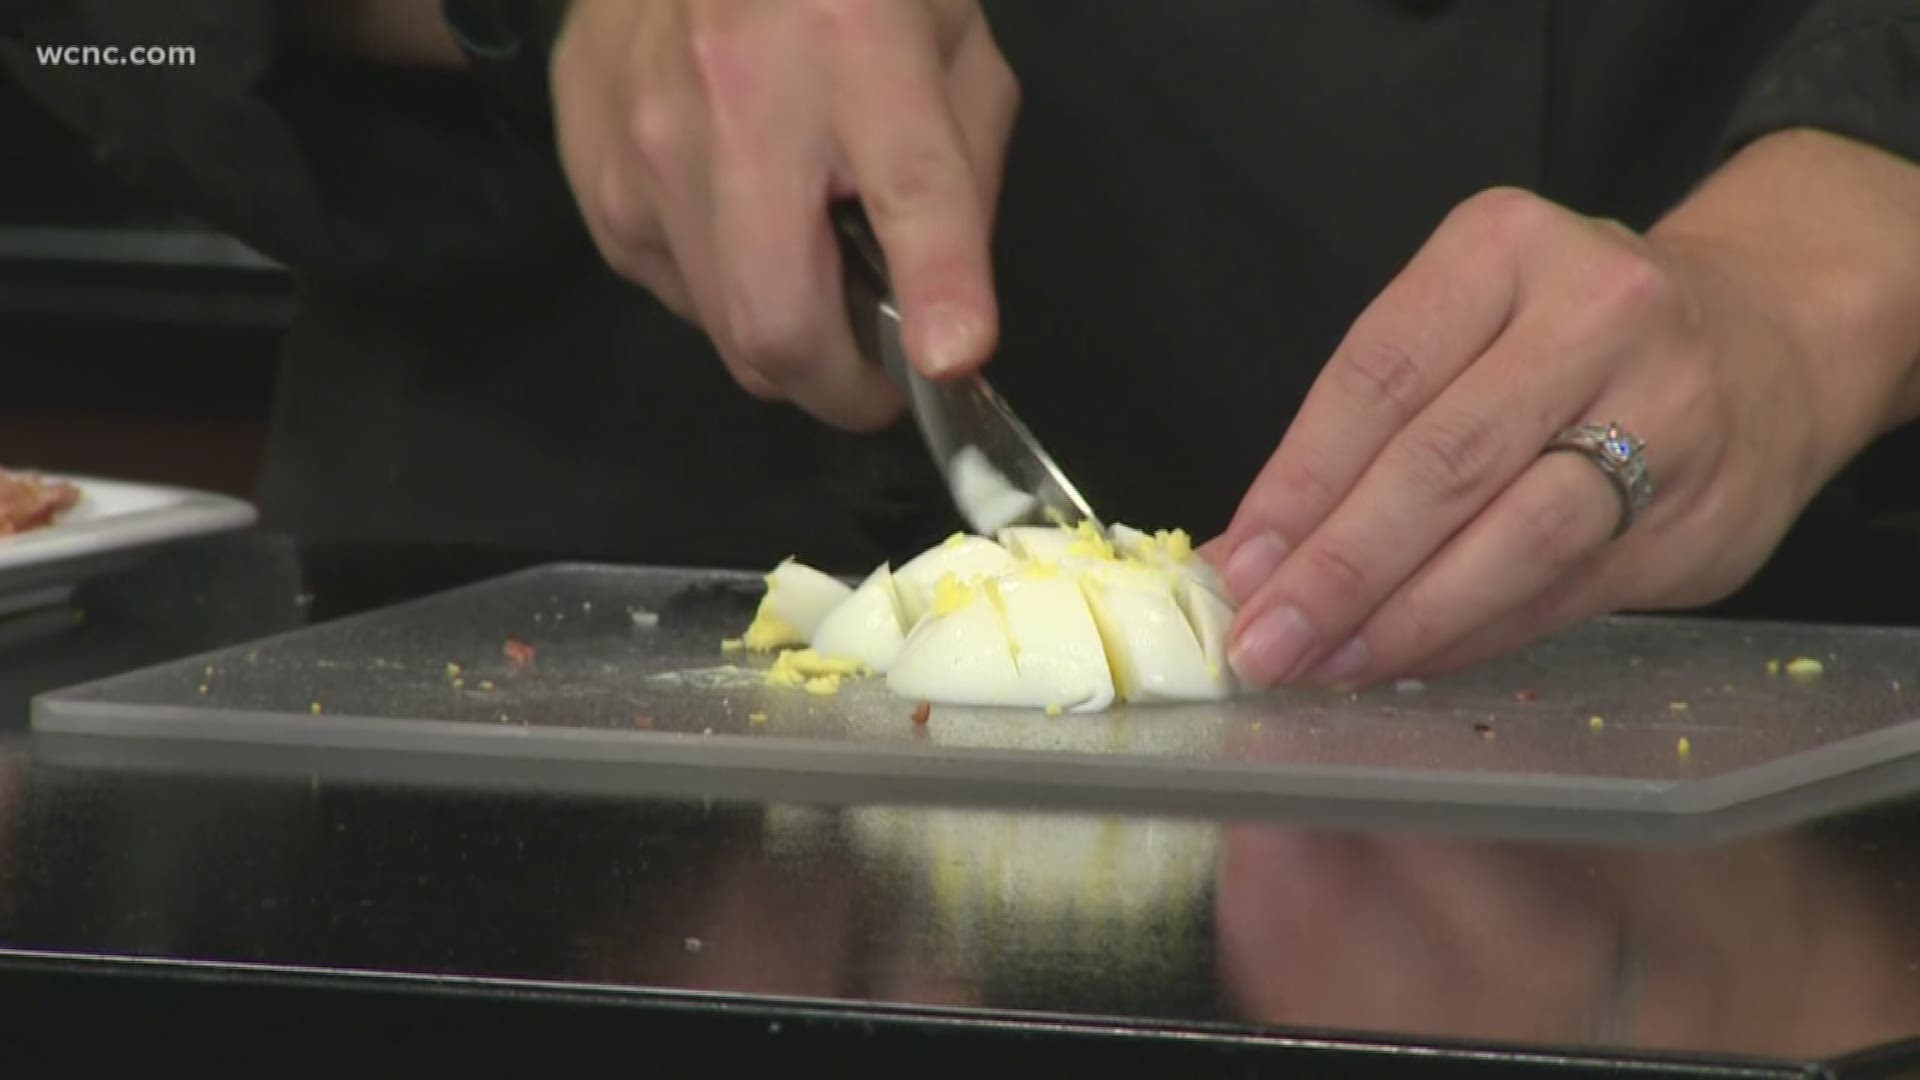 Chef Julie Busha shows us how to make a delicious breakfast using eggs and English muffins.